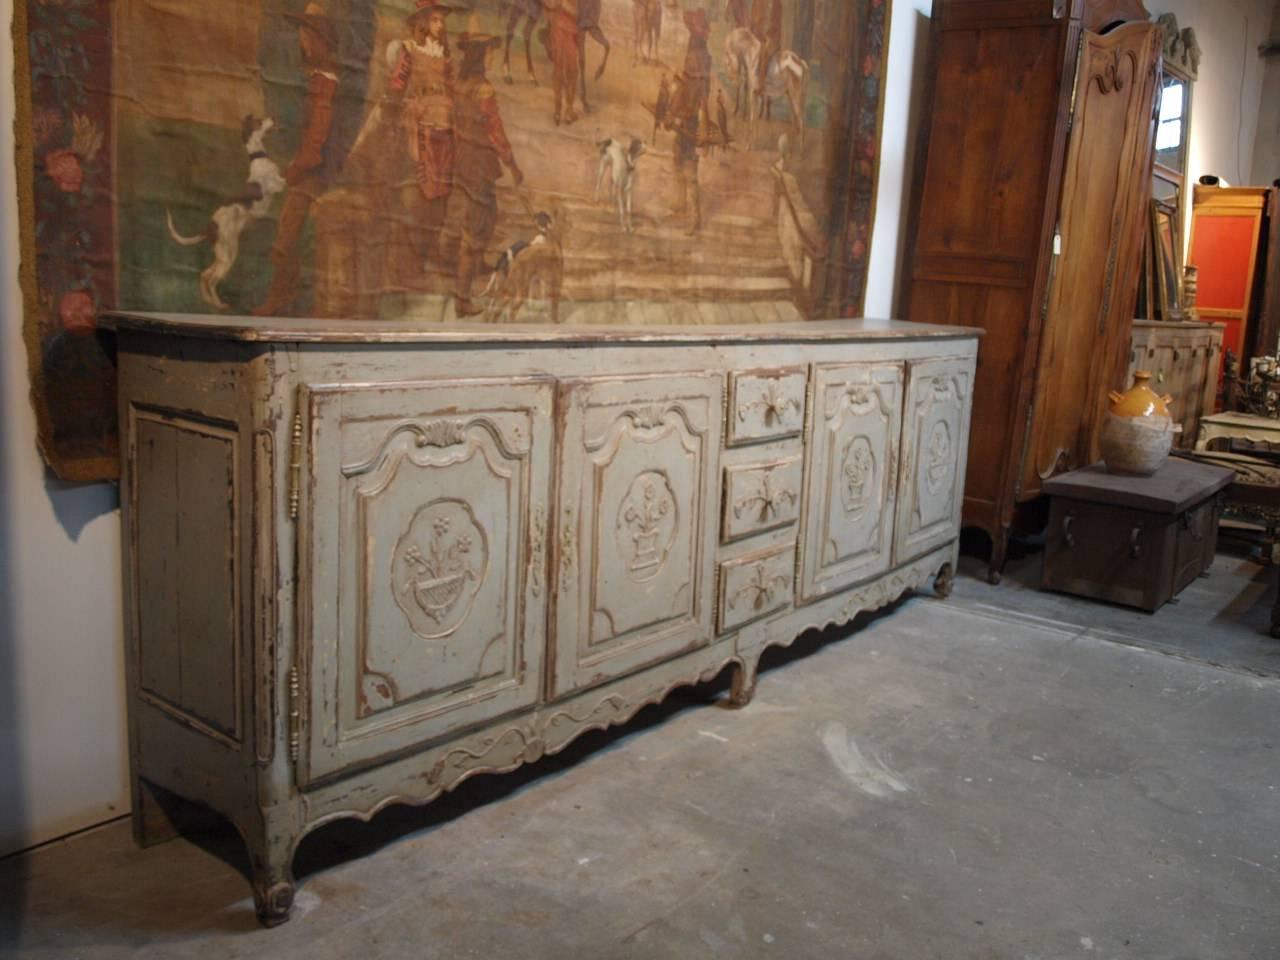 A very charming and very long later 19th century French Provençal enfilade buffet in painted wood. Four molded door panels and three drawers, all with wonderful carving detail. This terrific serving piece offers great storage.